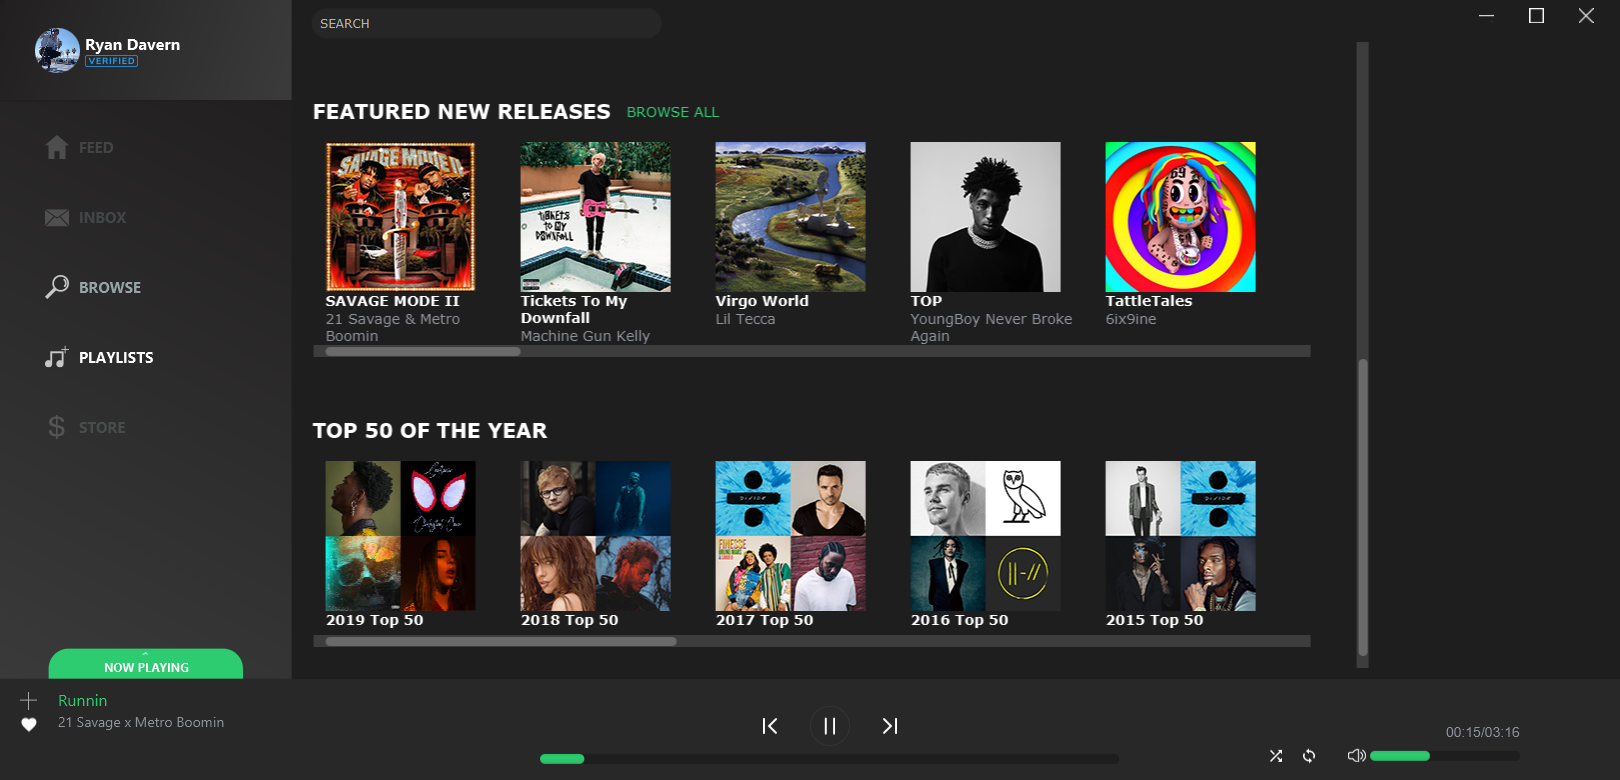 Playlist page also displays featured albums and custom curated playlists from billboard.